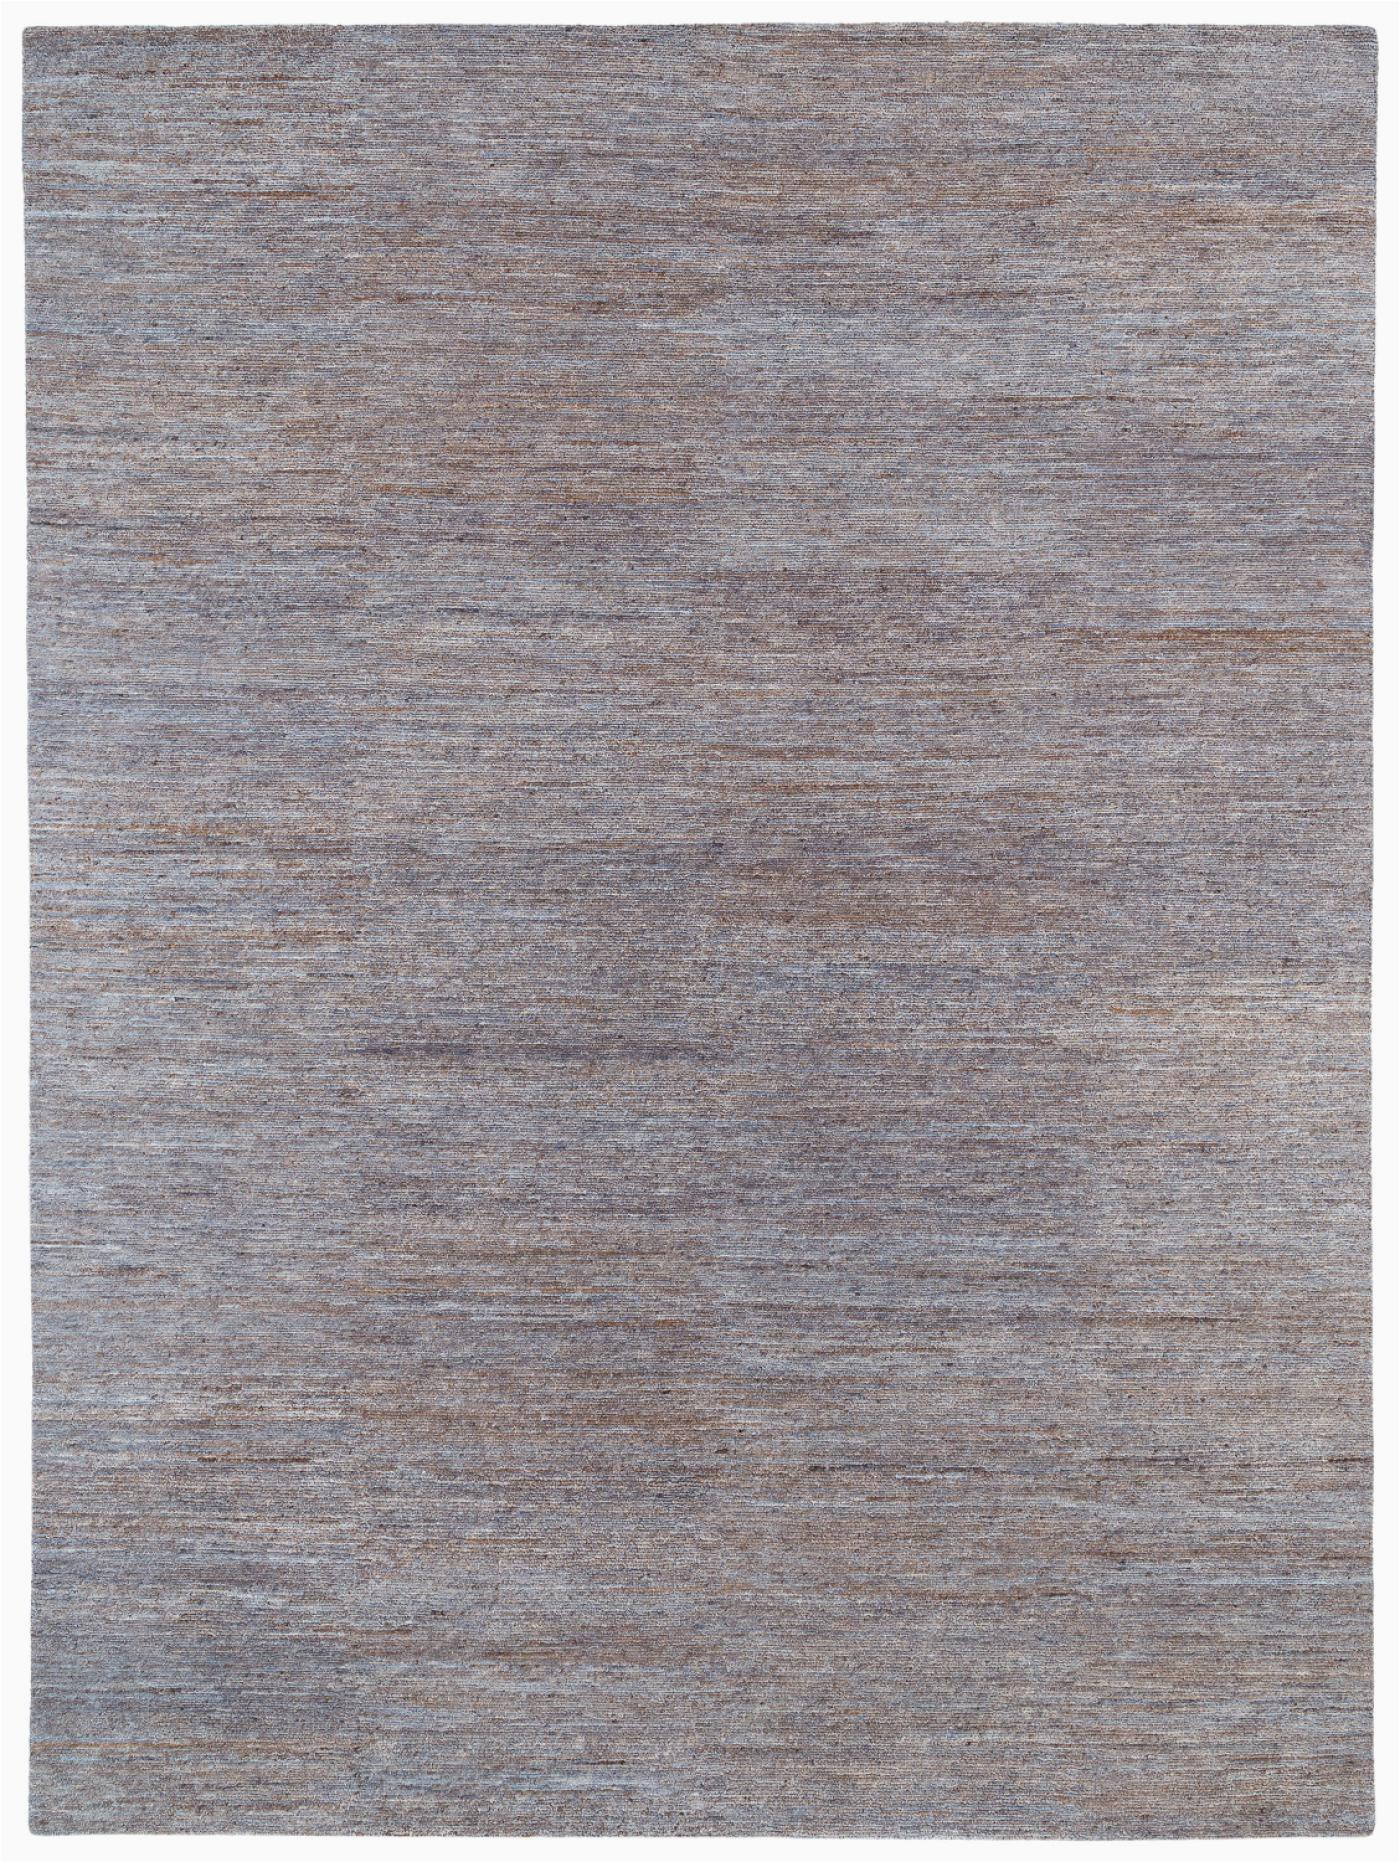 Solid Color Textured area Rugs Joseph Carini Contemporary Textured solid Wool area Rug 9 X12